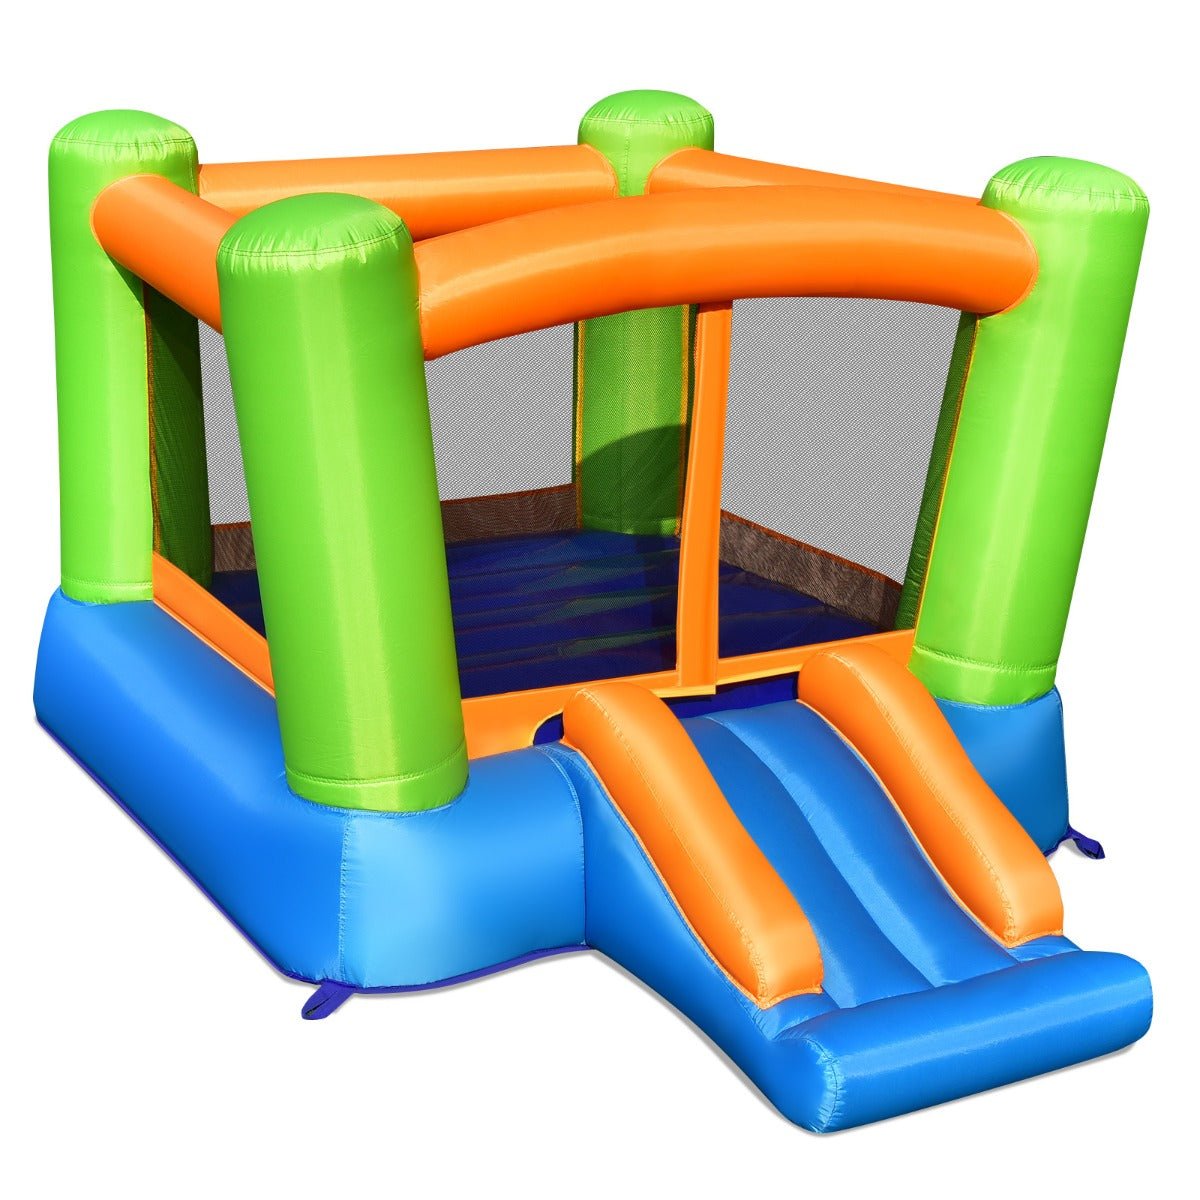 Enjoy Bouncing and Sliding with the Inflatable Bounce House - Order Now!